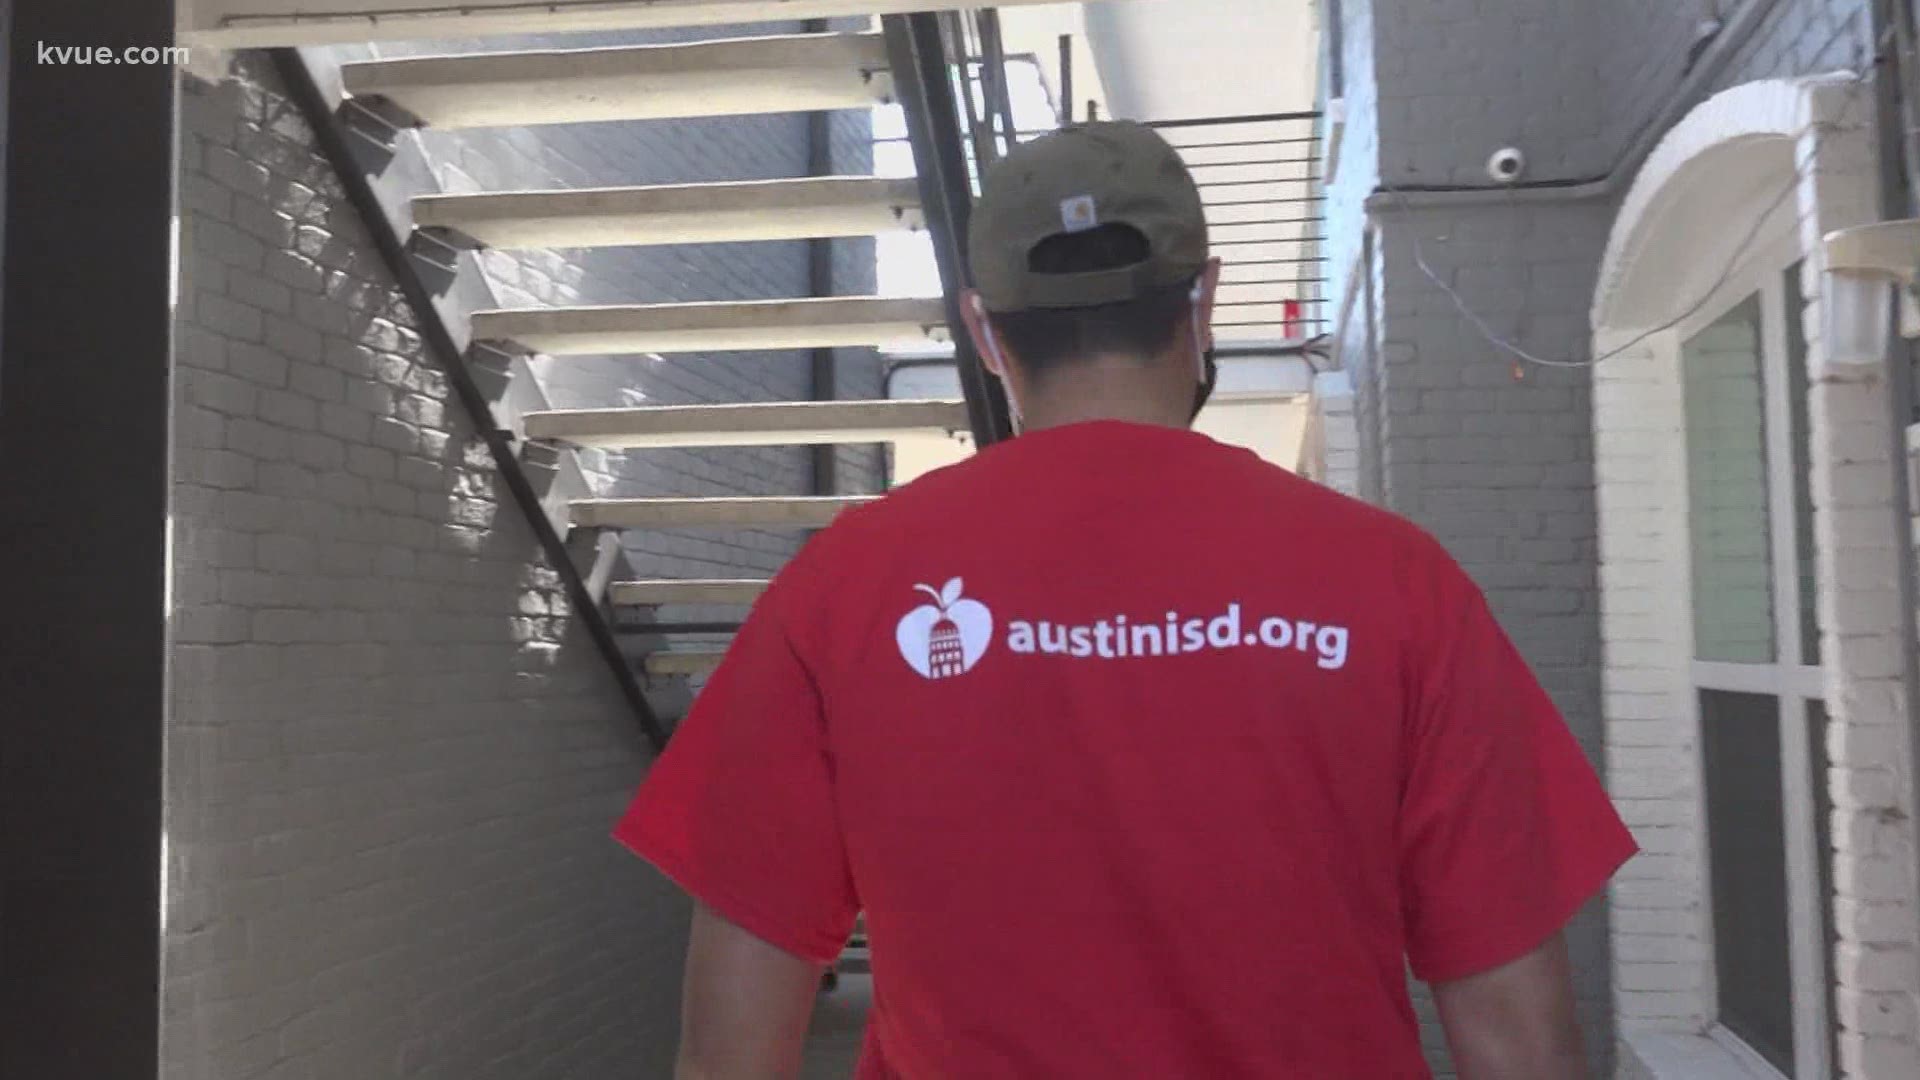 Volunteers from Austin ISD went knocking on doors on Saturday. The goal was to reach out to students who have transferred or not shown up to school.